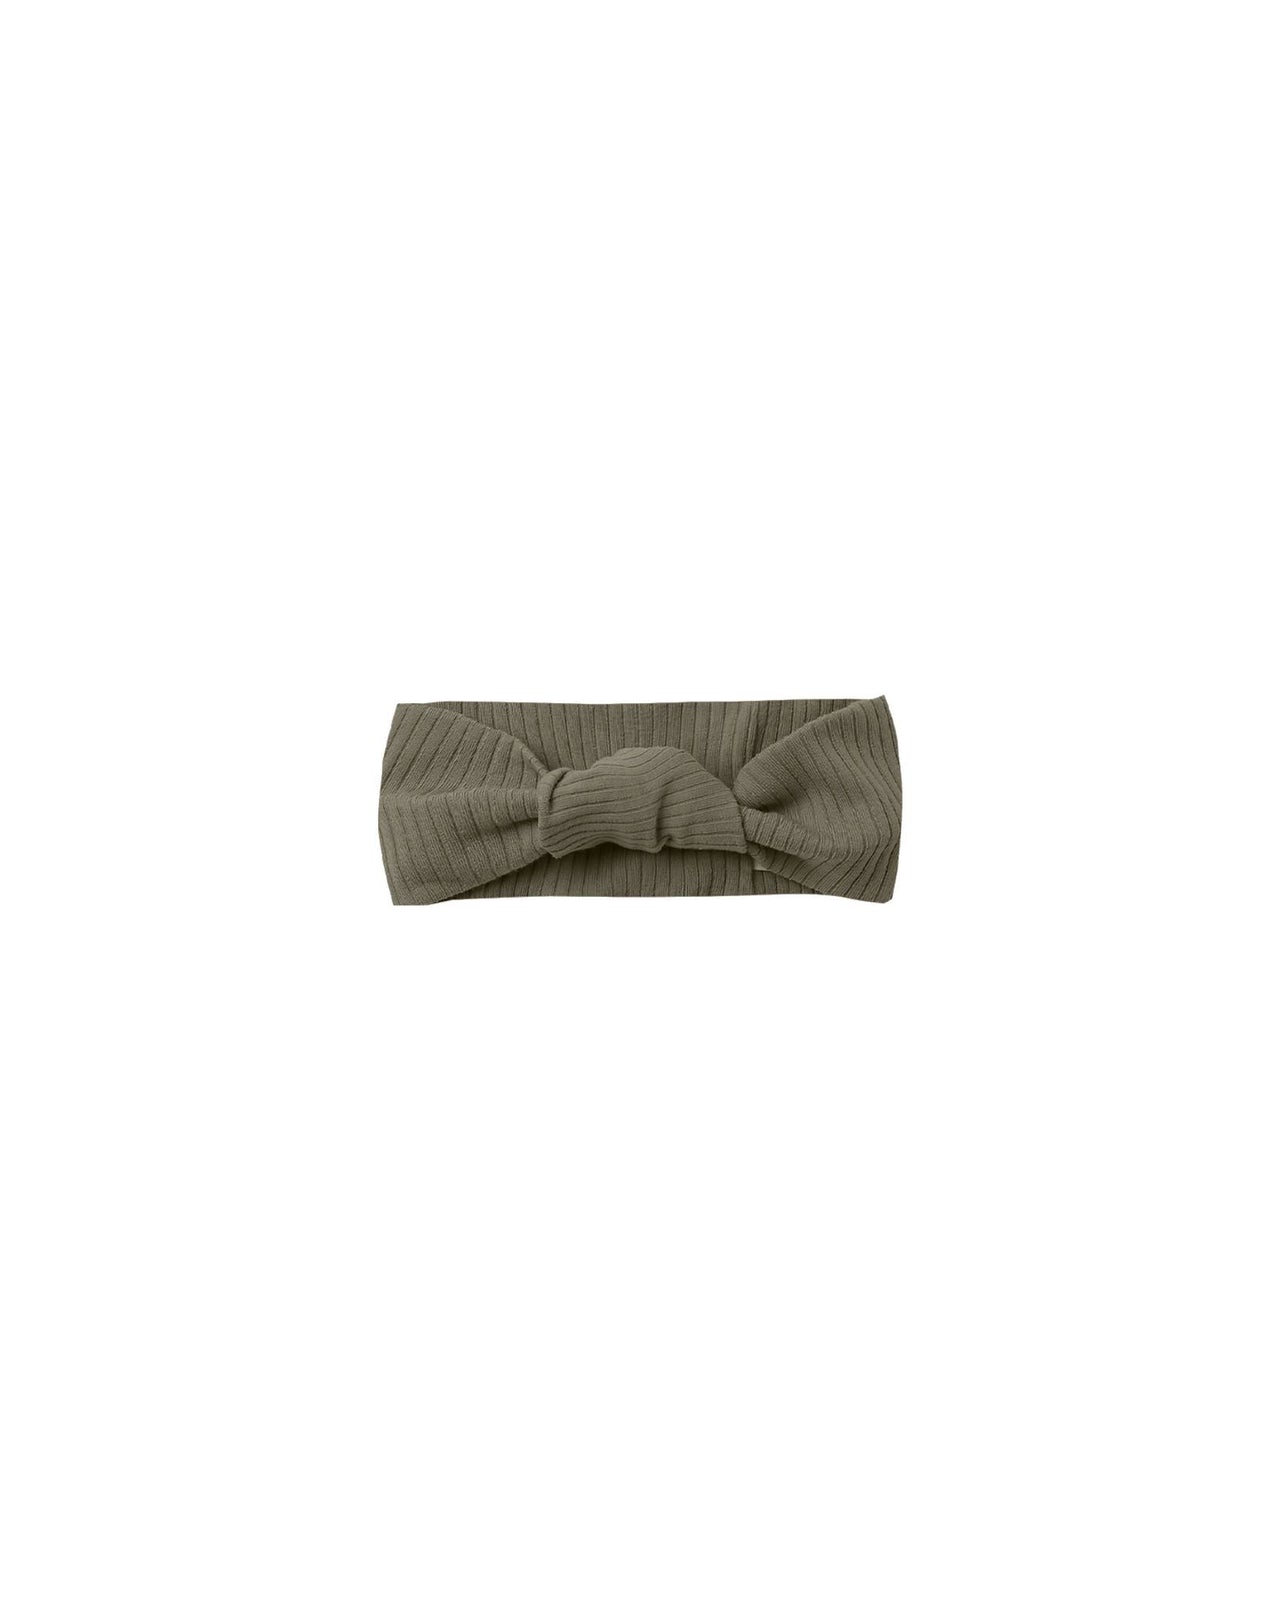 Quincy Mae Ribbed Knotted Headband, Forest